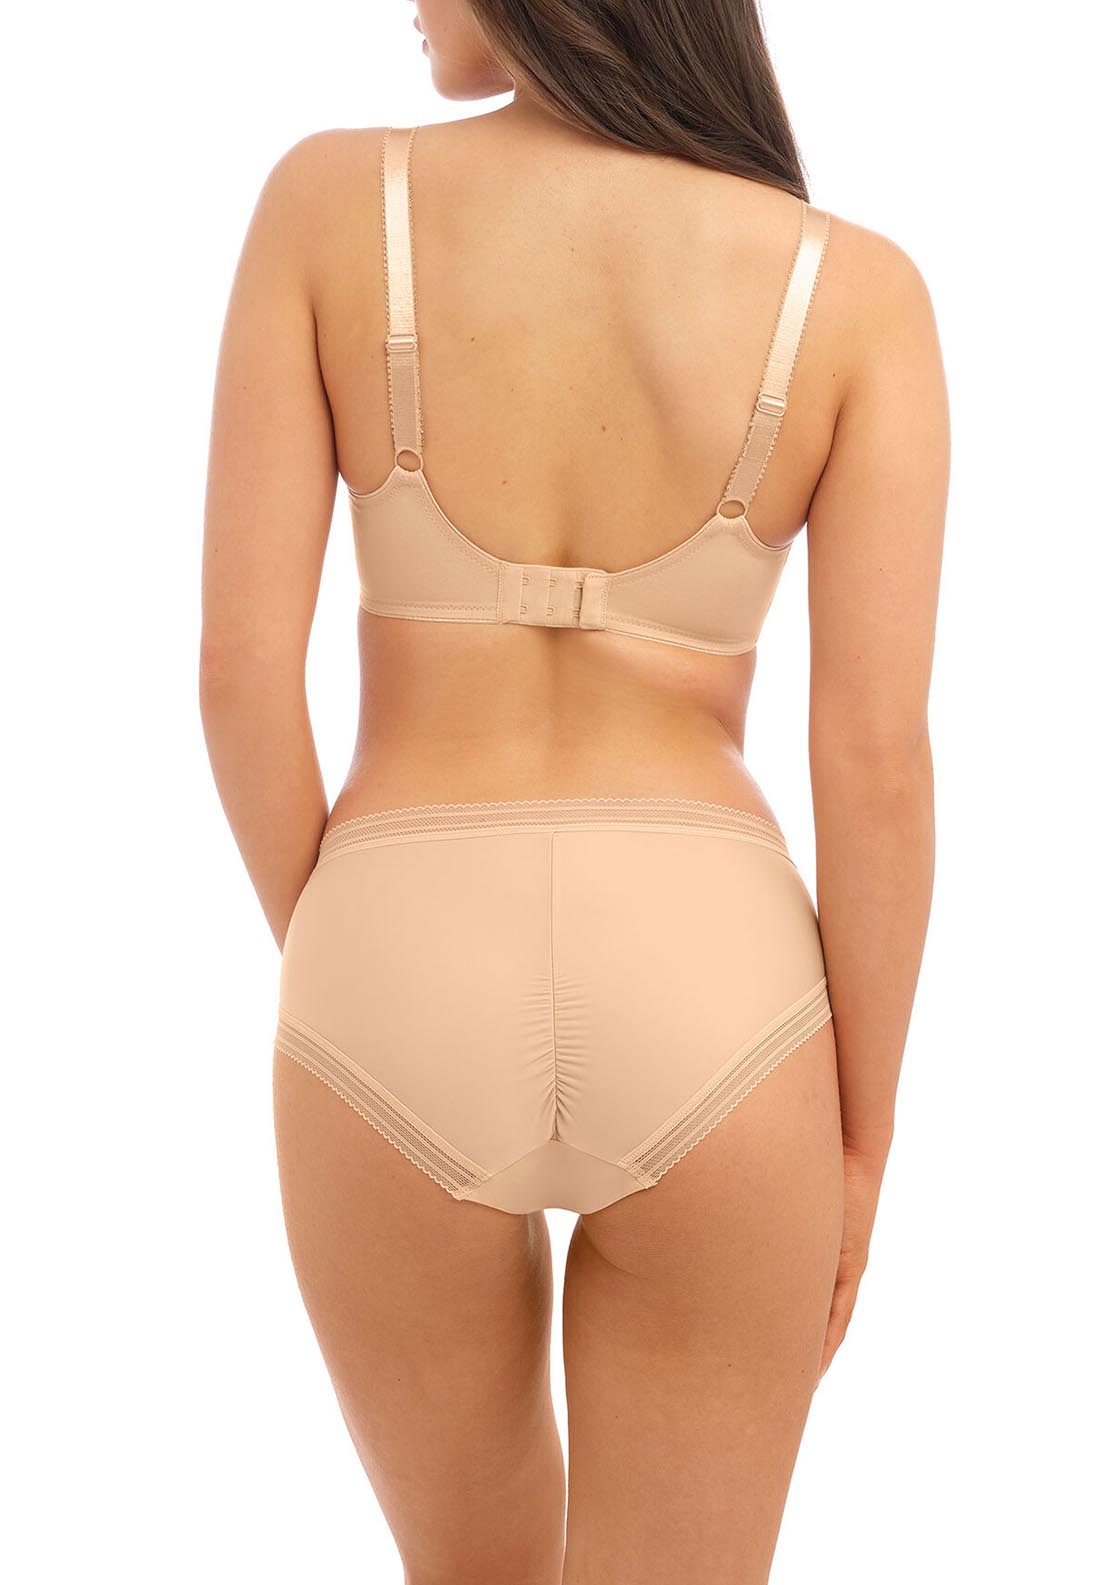 Fantasie Fusion Full Cup Side Support Bra - Sand 3 Shaws Department Stores